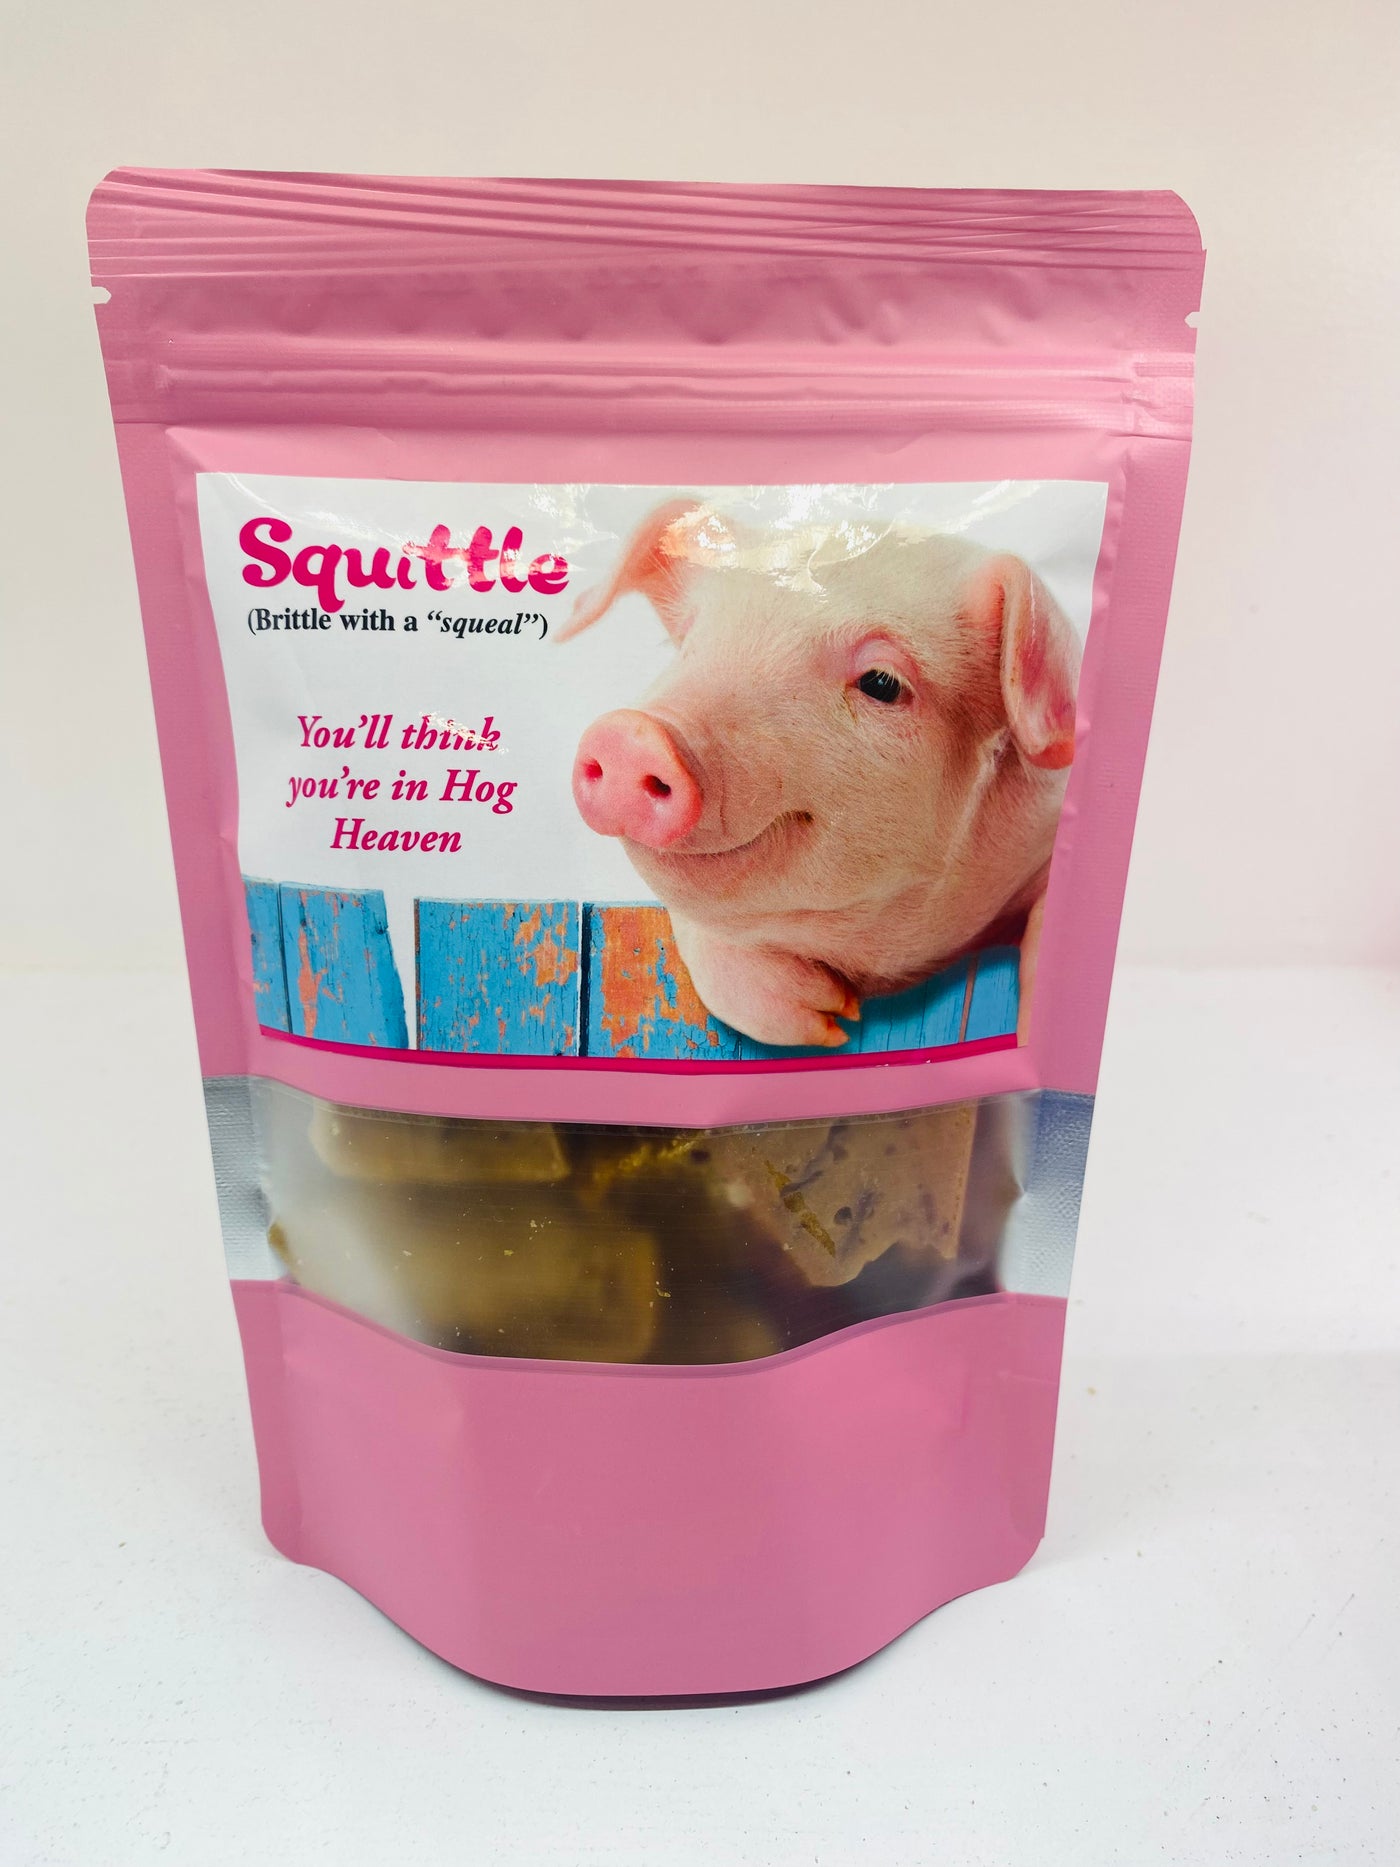 Squittle (brittle with a “squeal”)